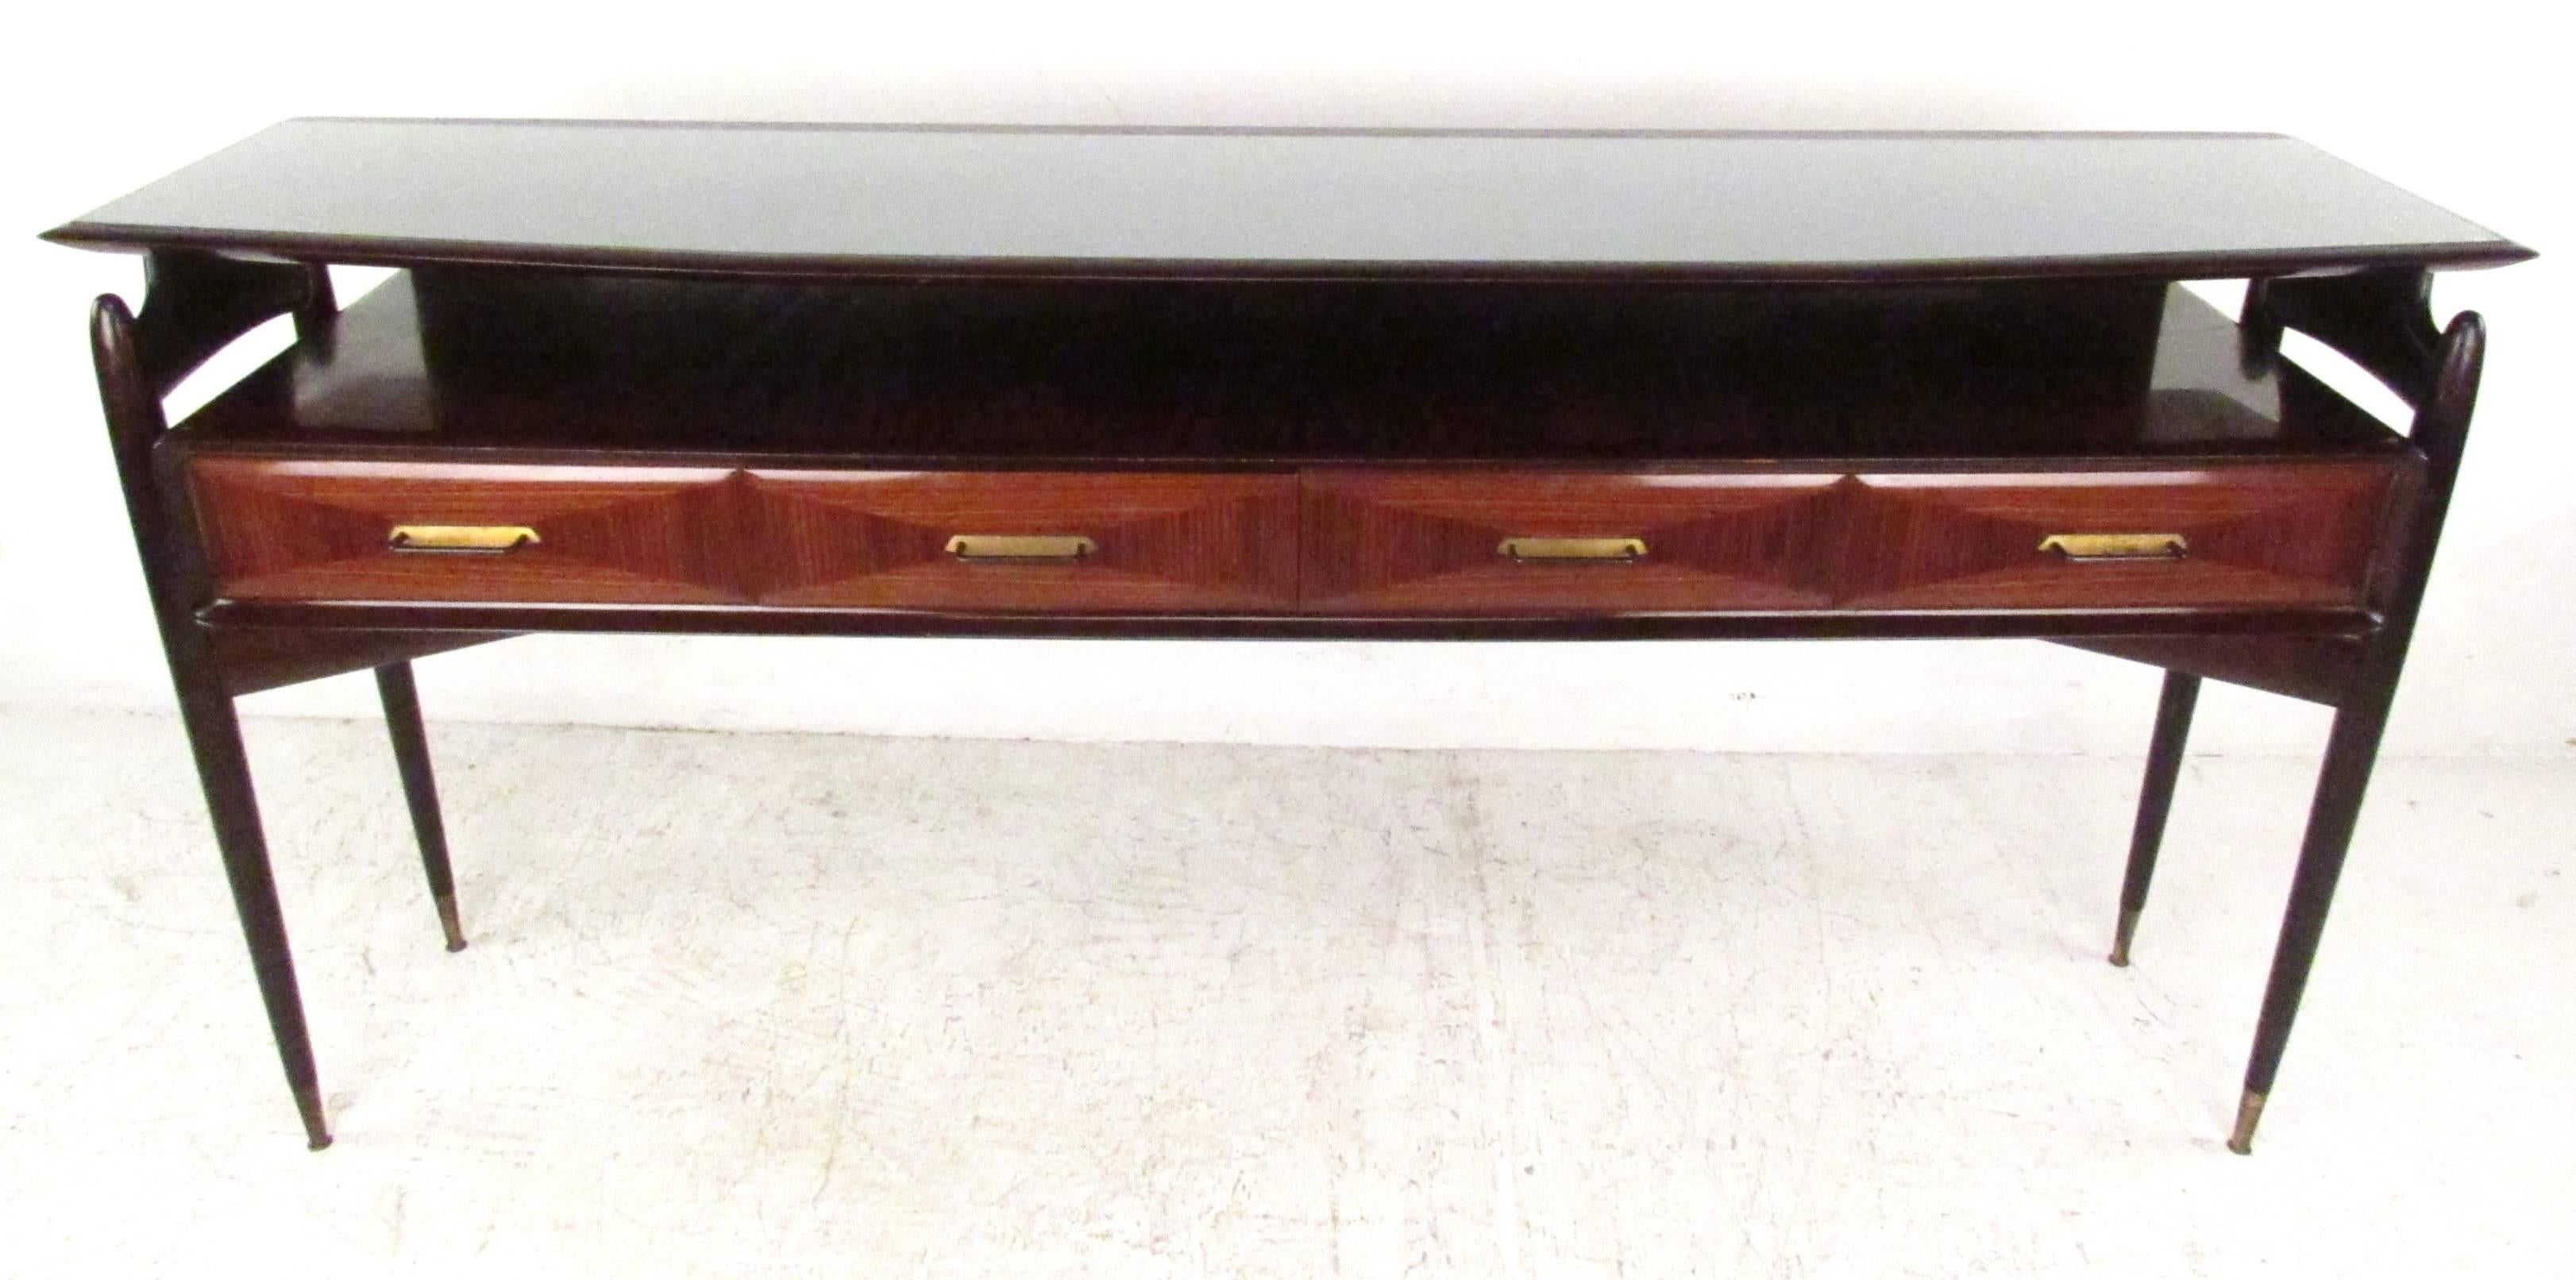 Elegant Italian modern four-drawer server with floating glass top, long tapered legs with brass sabots, and sculptural wood detailing with a high gloss finish. 

Please confirm item location (NY or NJ) with dealer.
 